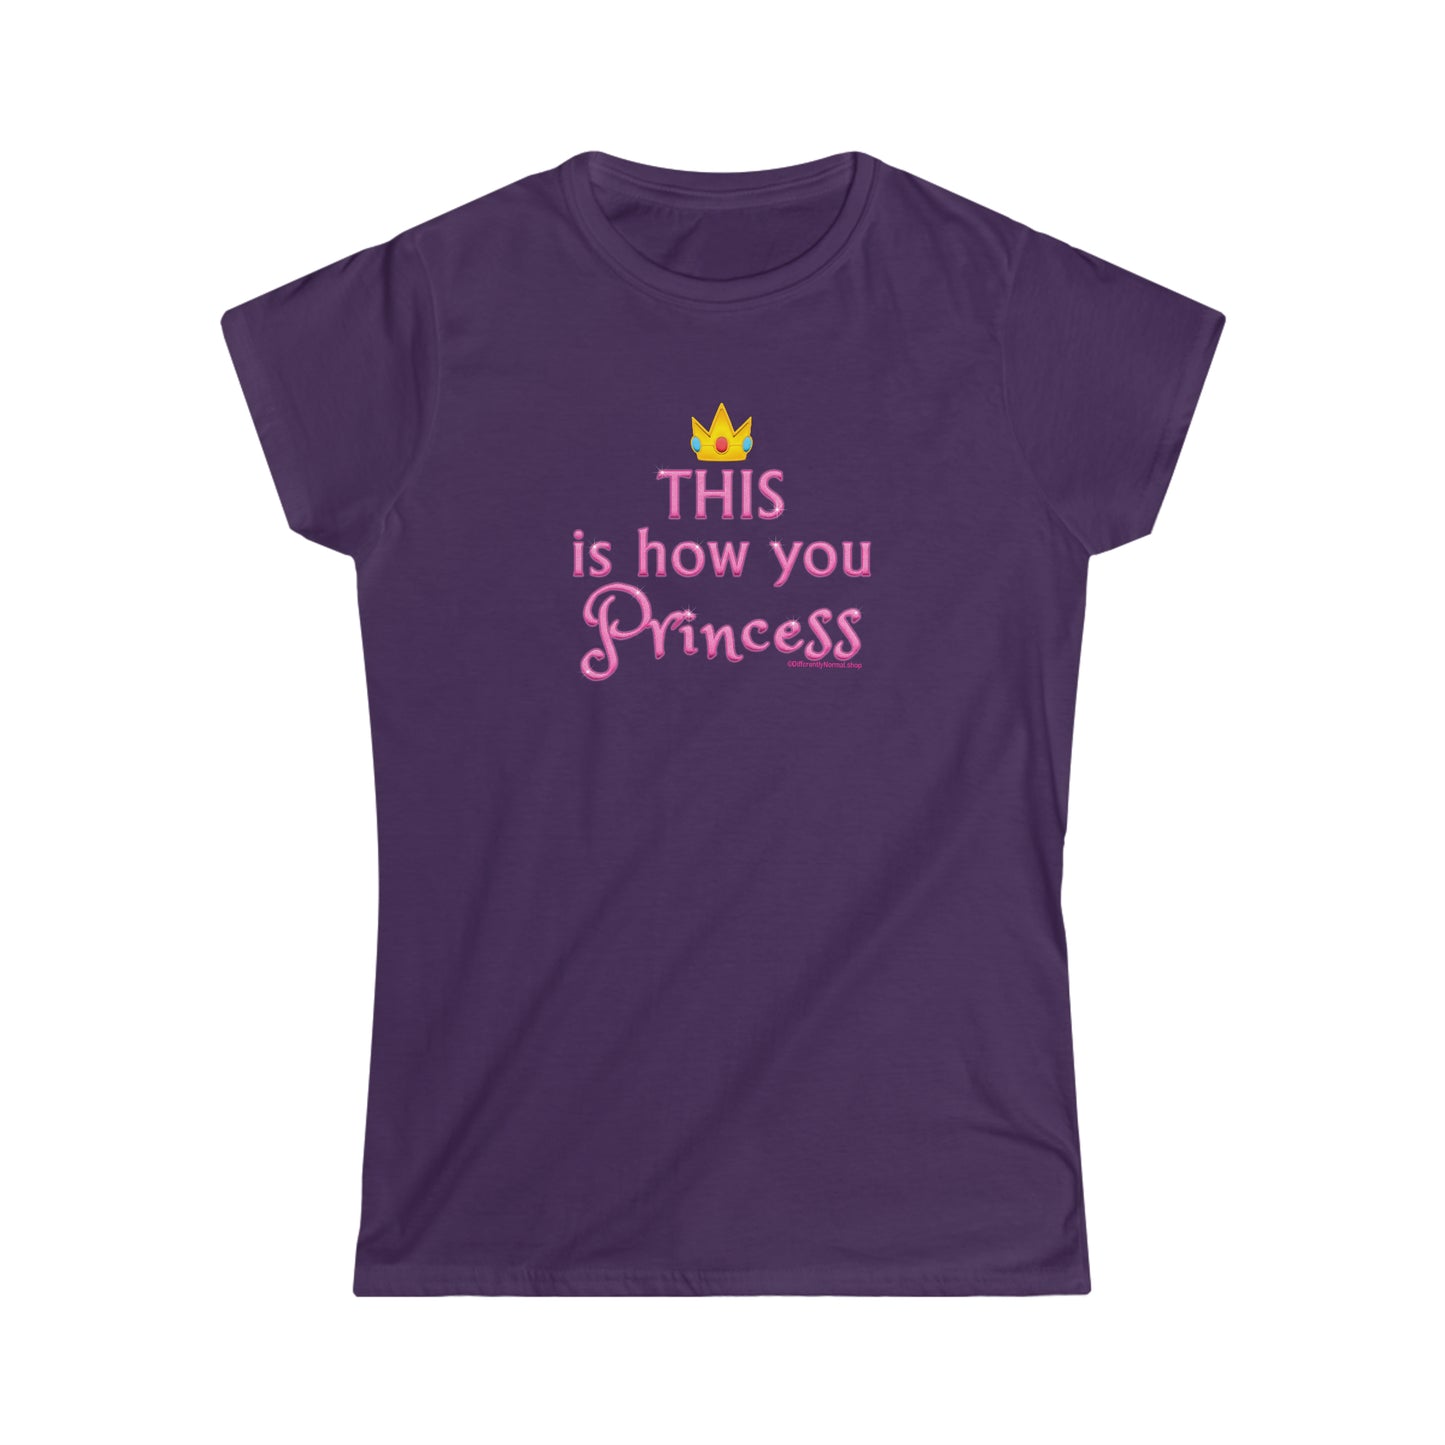 This is How You Princess - Fitted T-Shirt